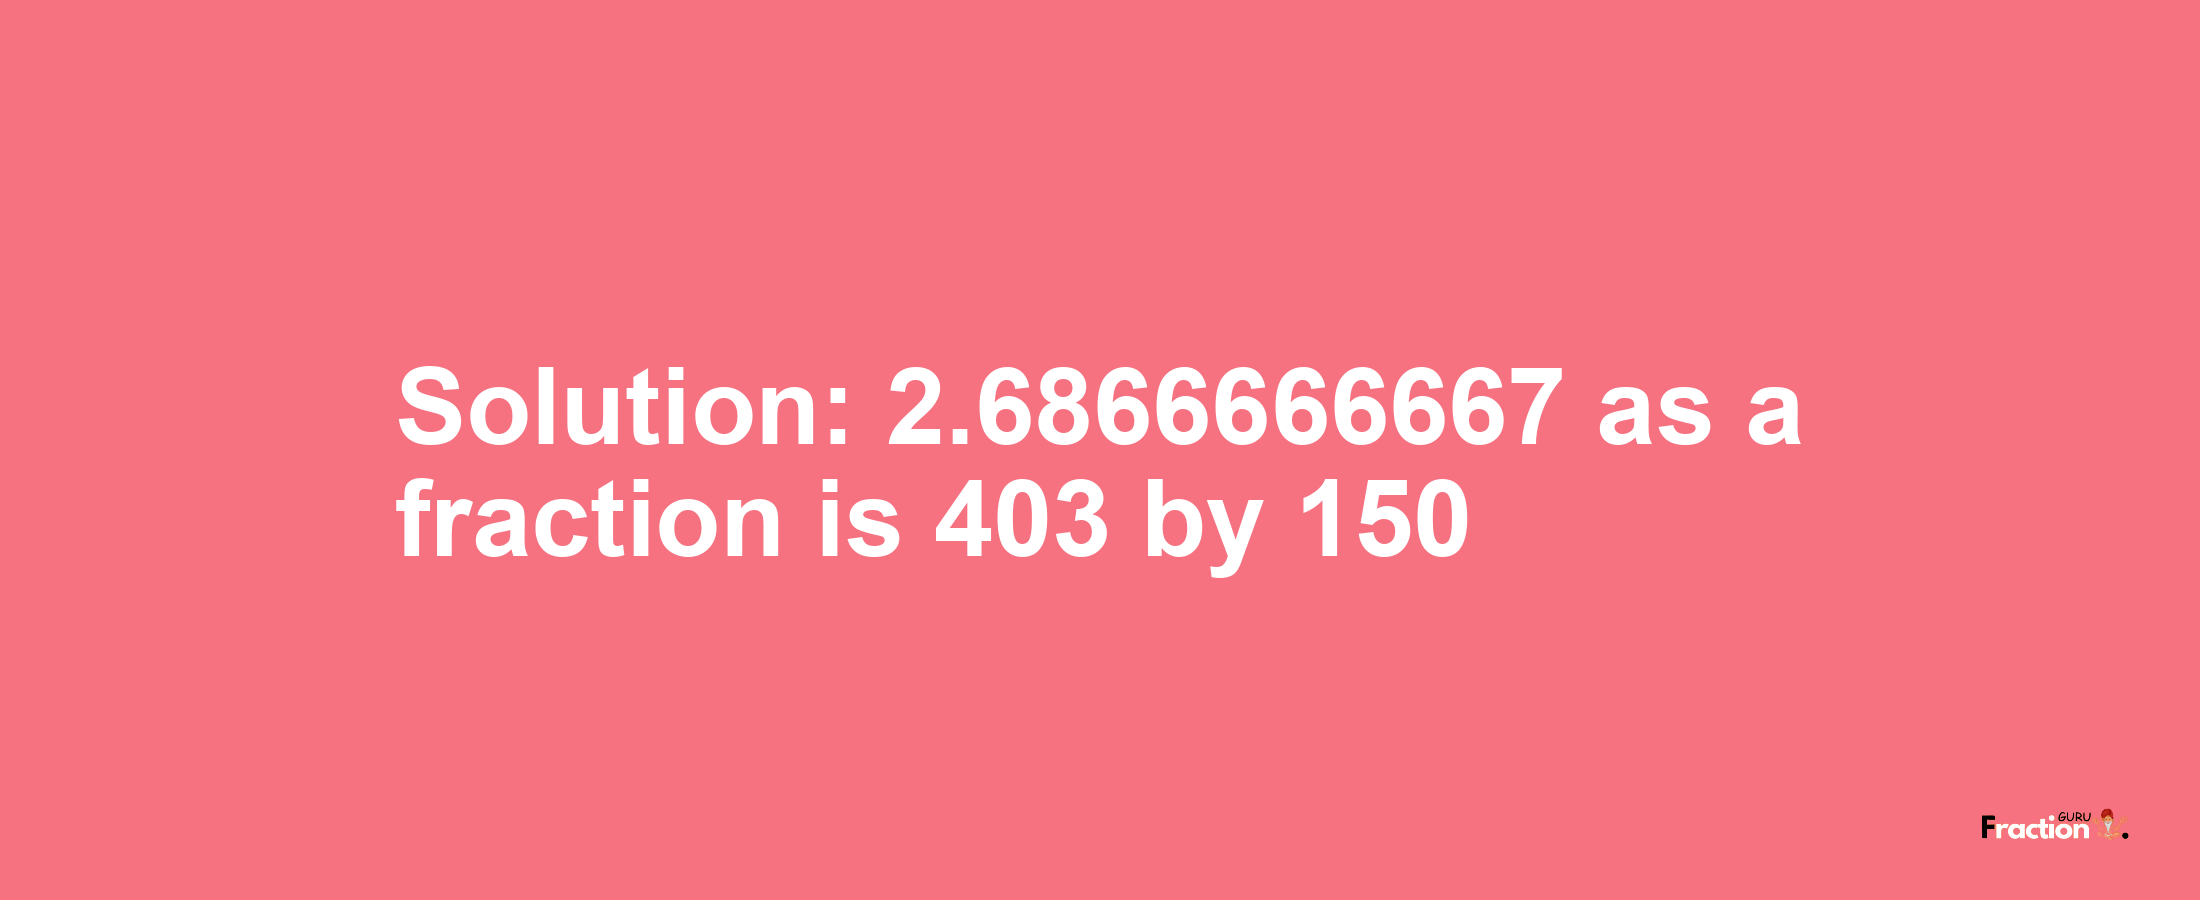 Solution:2.6866666667 as a fraction is 403/150